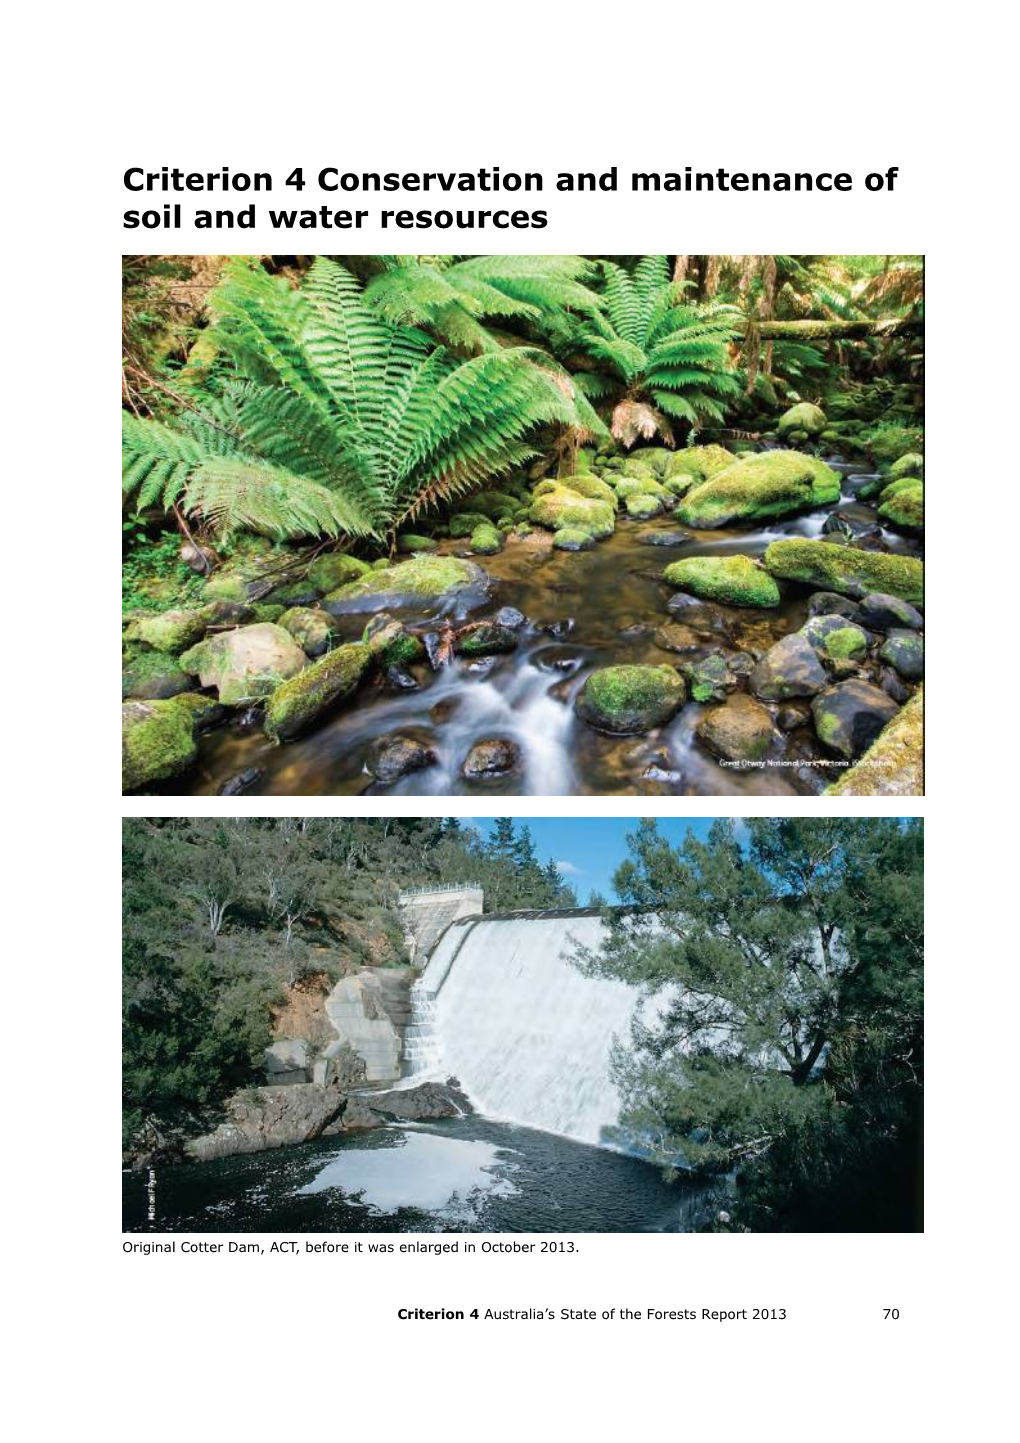 Australia's State of the Forests Report 2013 - Criterion 4 Conservation and Maintenance